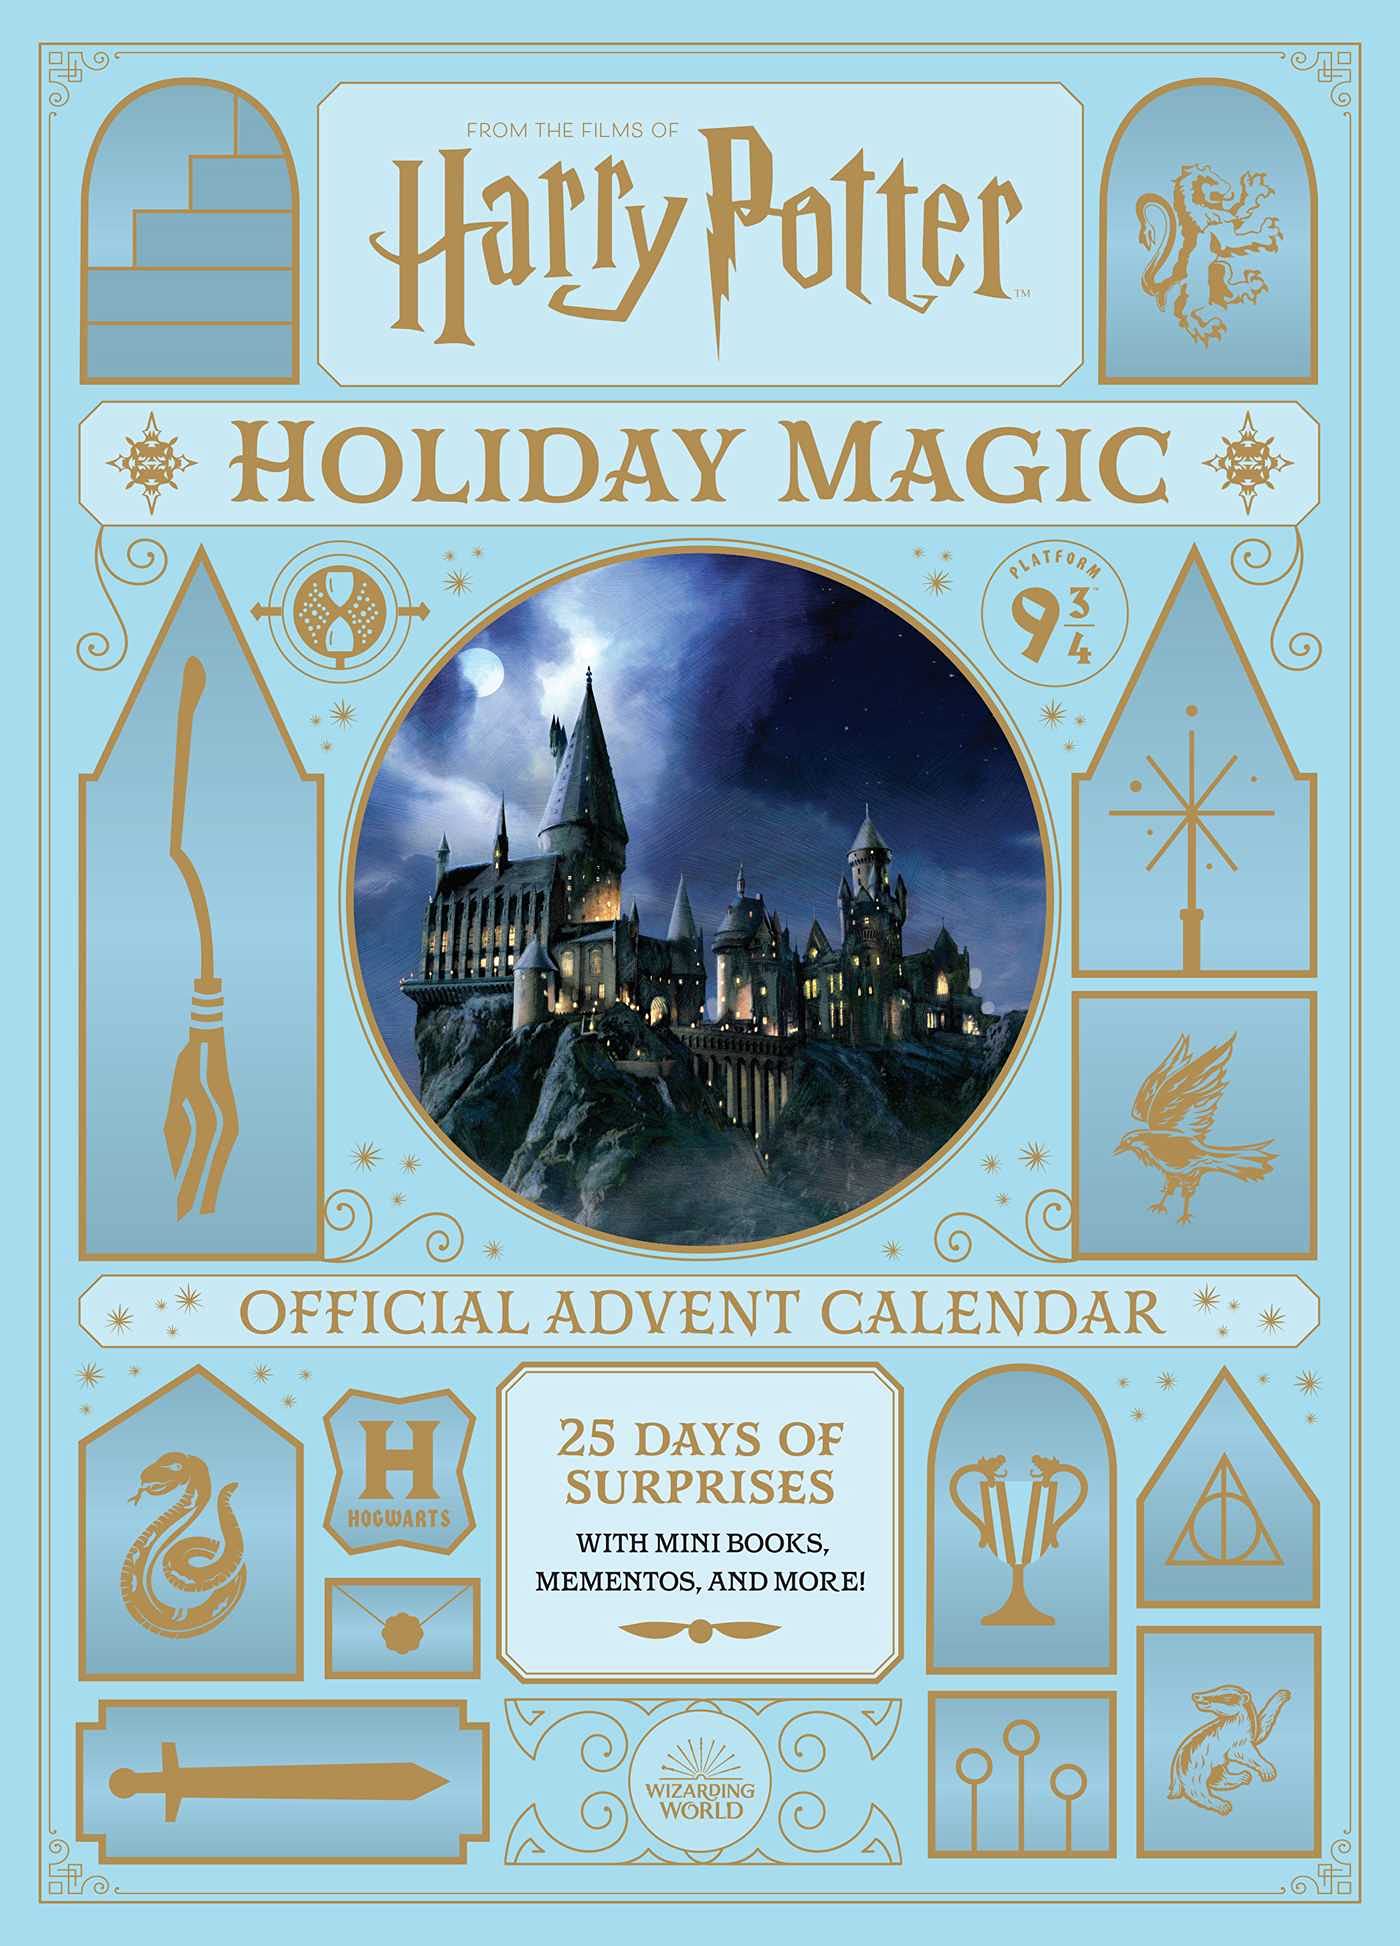 Calendrier Bloc notes Harry Potter - Playbac